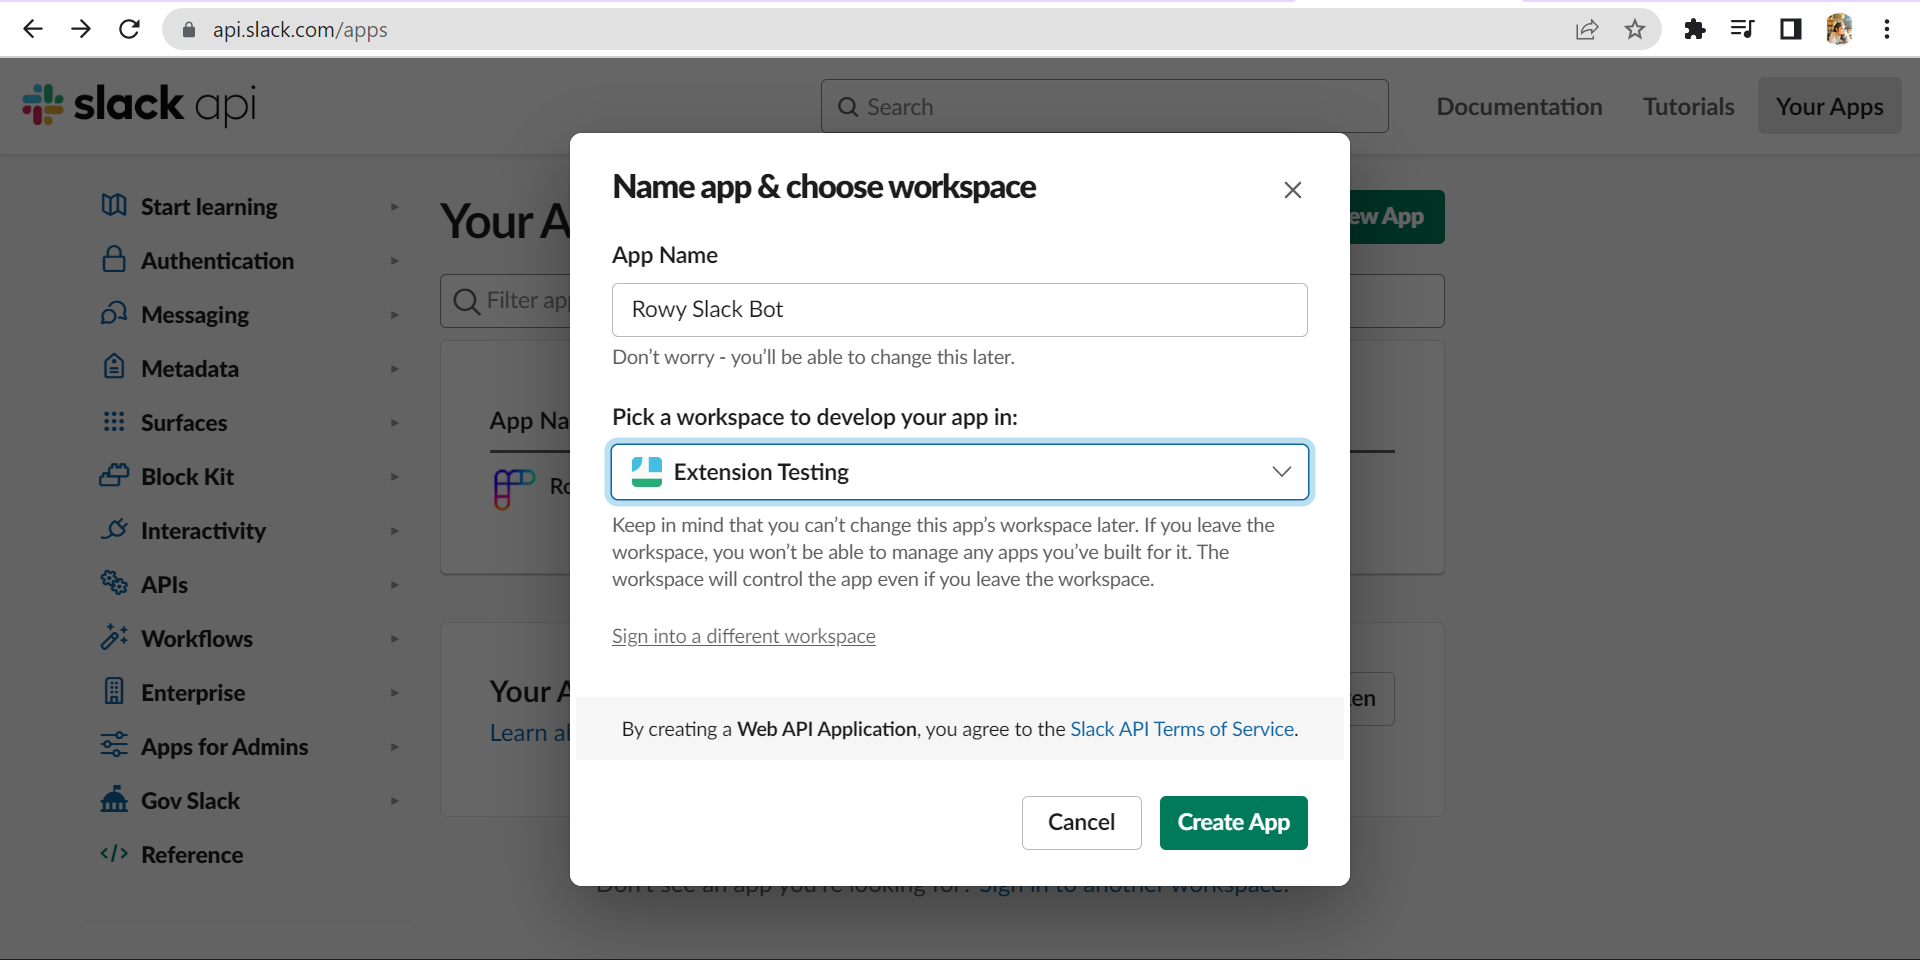 The App Name and Choose Workspace page on the Slack API website.